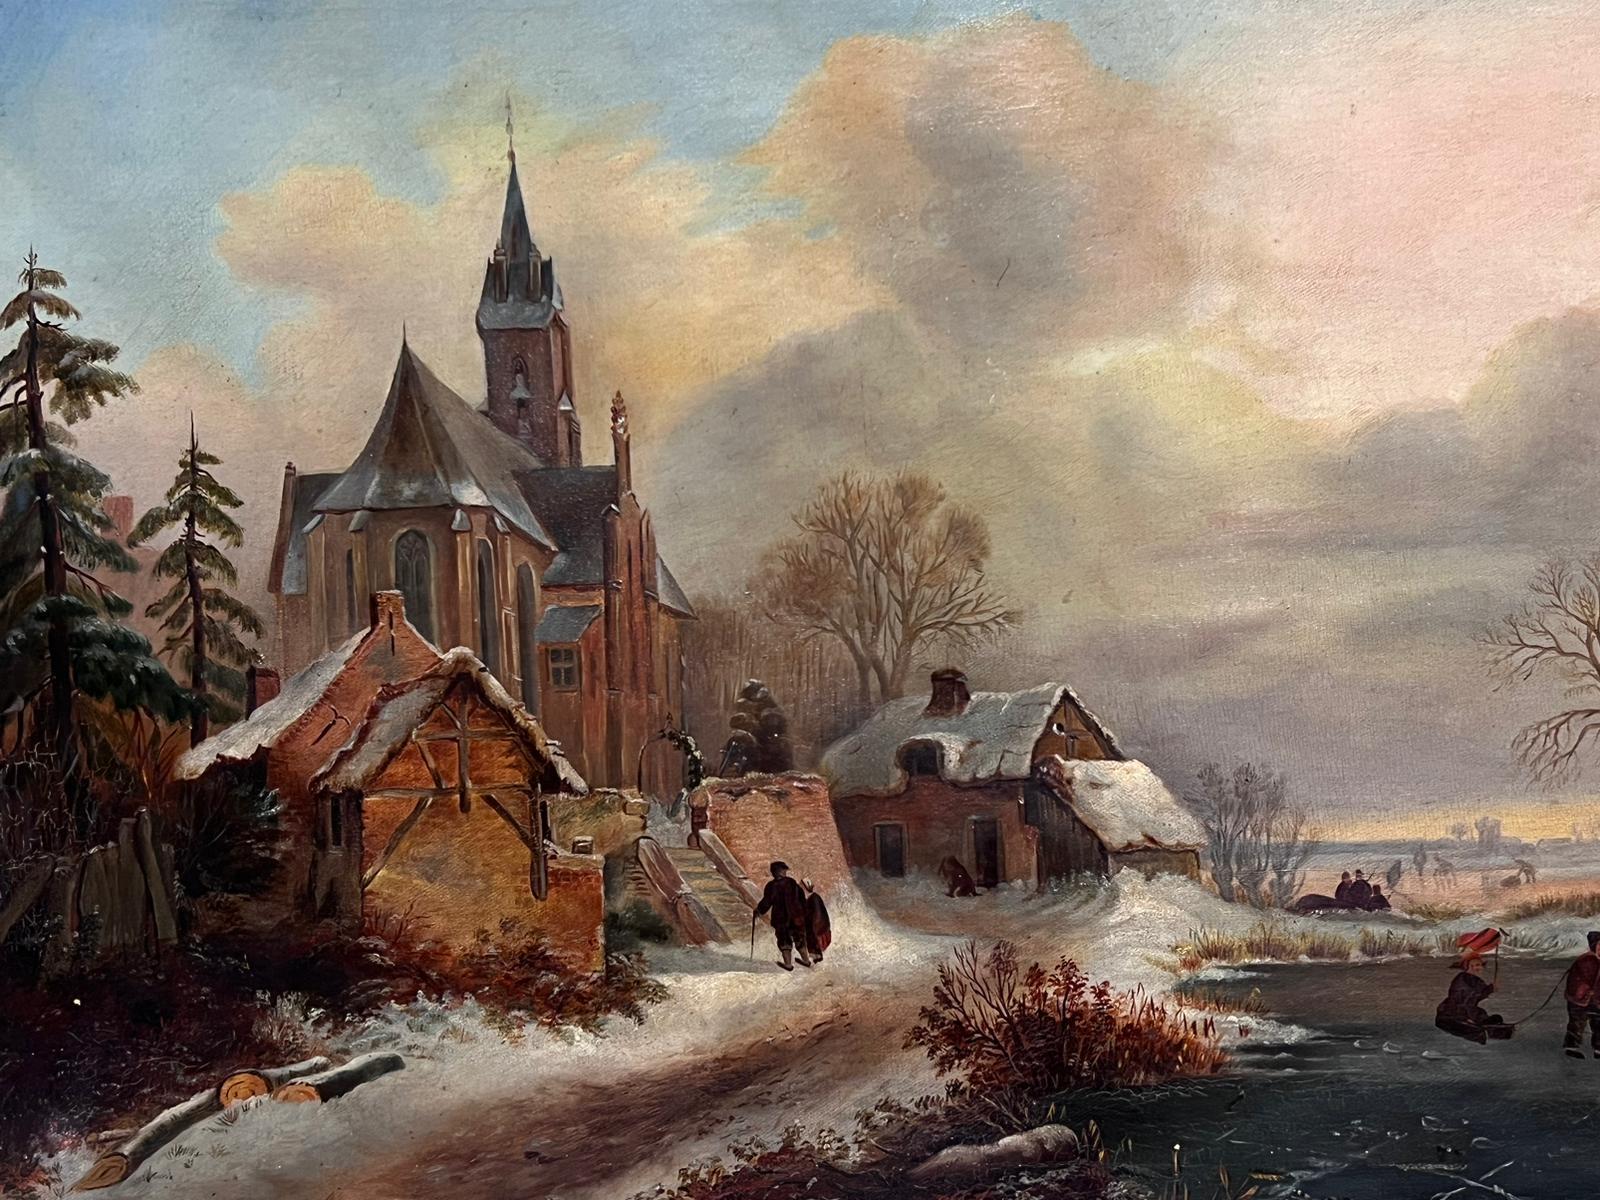 The Winter Landscape
Dutch School, 19th century
oil painting on canvas, framed
framed: 22 x 28 inches
canvas: 16.5 x 23  inches
provenance: private collection, UK
condition: very good and sound condition; please note the frame has old areas of